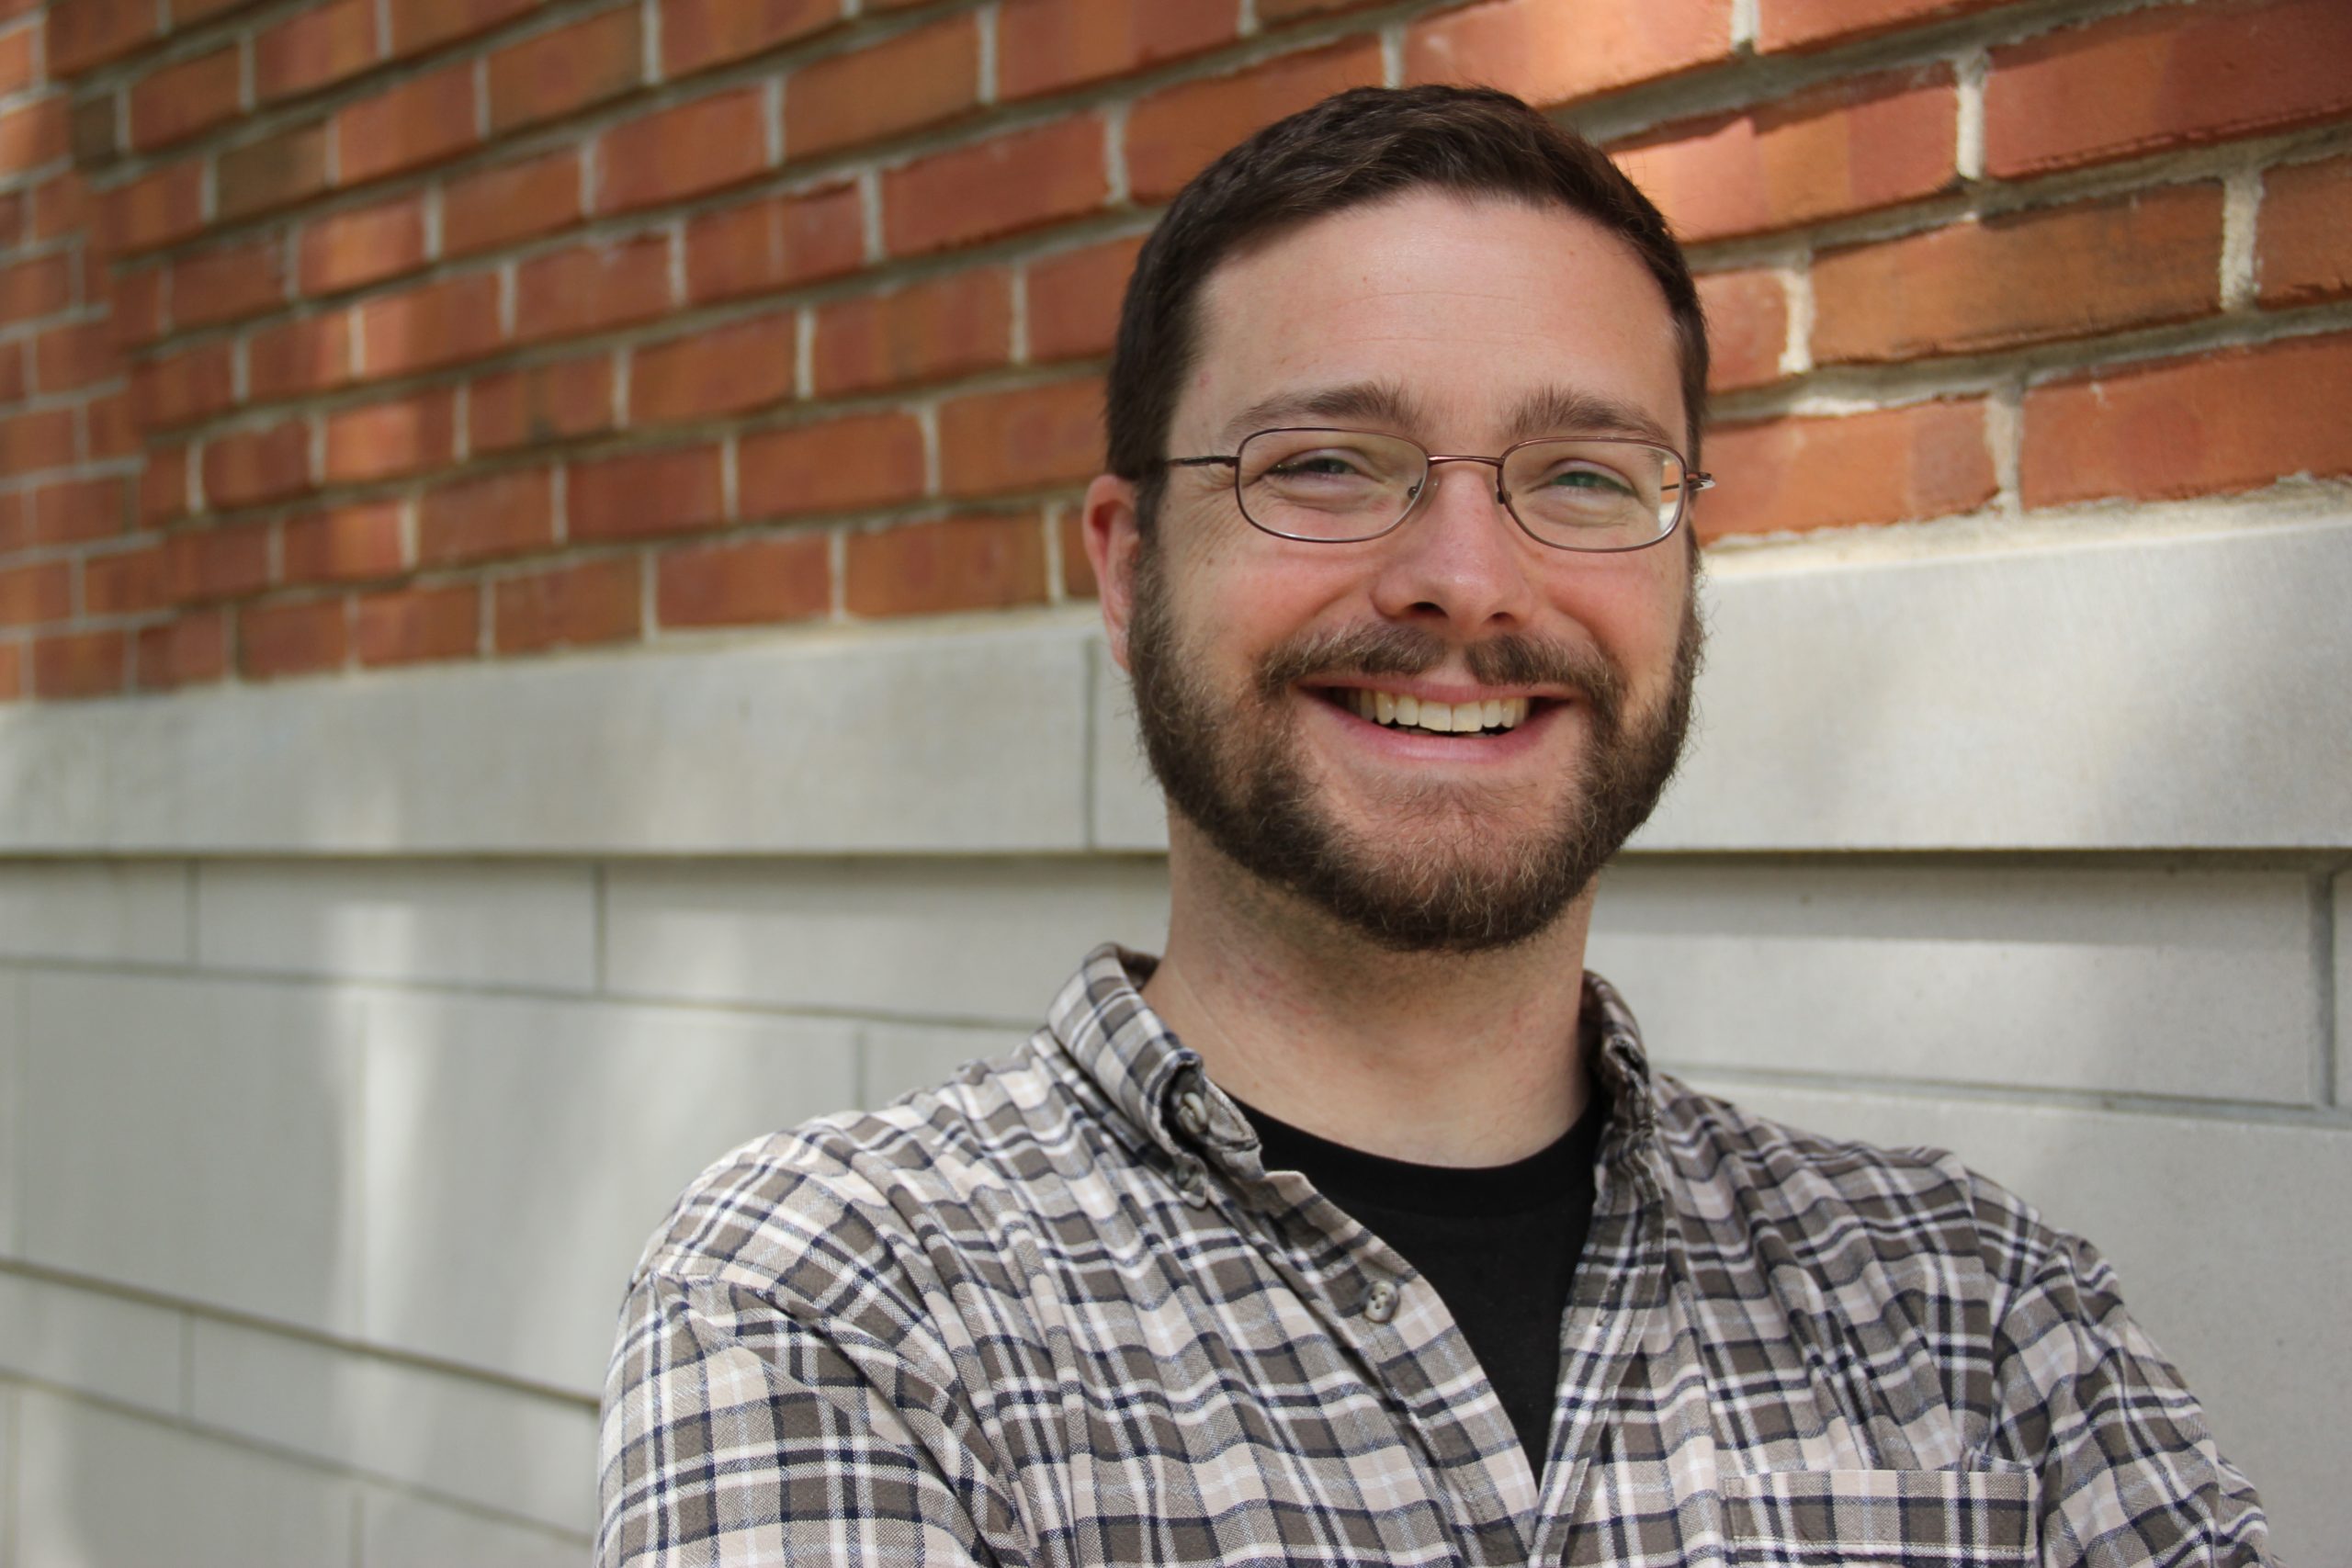 Matt is a white man with short brown hair, a close shaven beard, and a broad smile. He wears glasses and a light brown plaid shirt, and stands in front of a red brick wall.